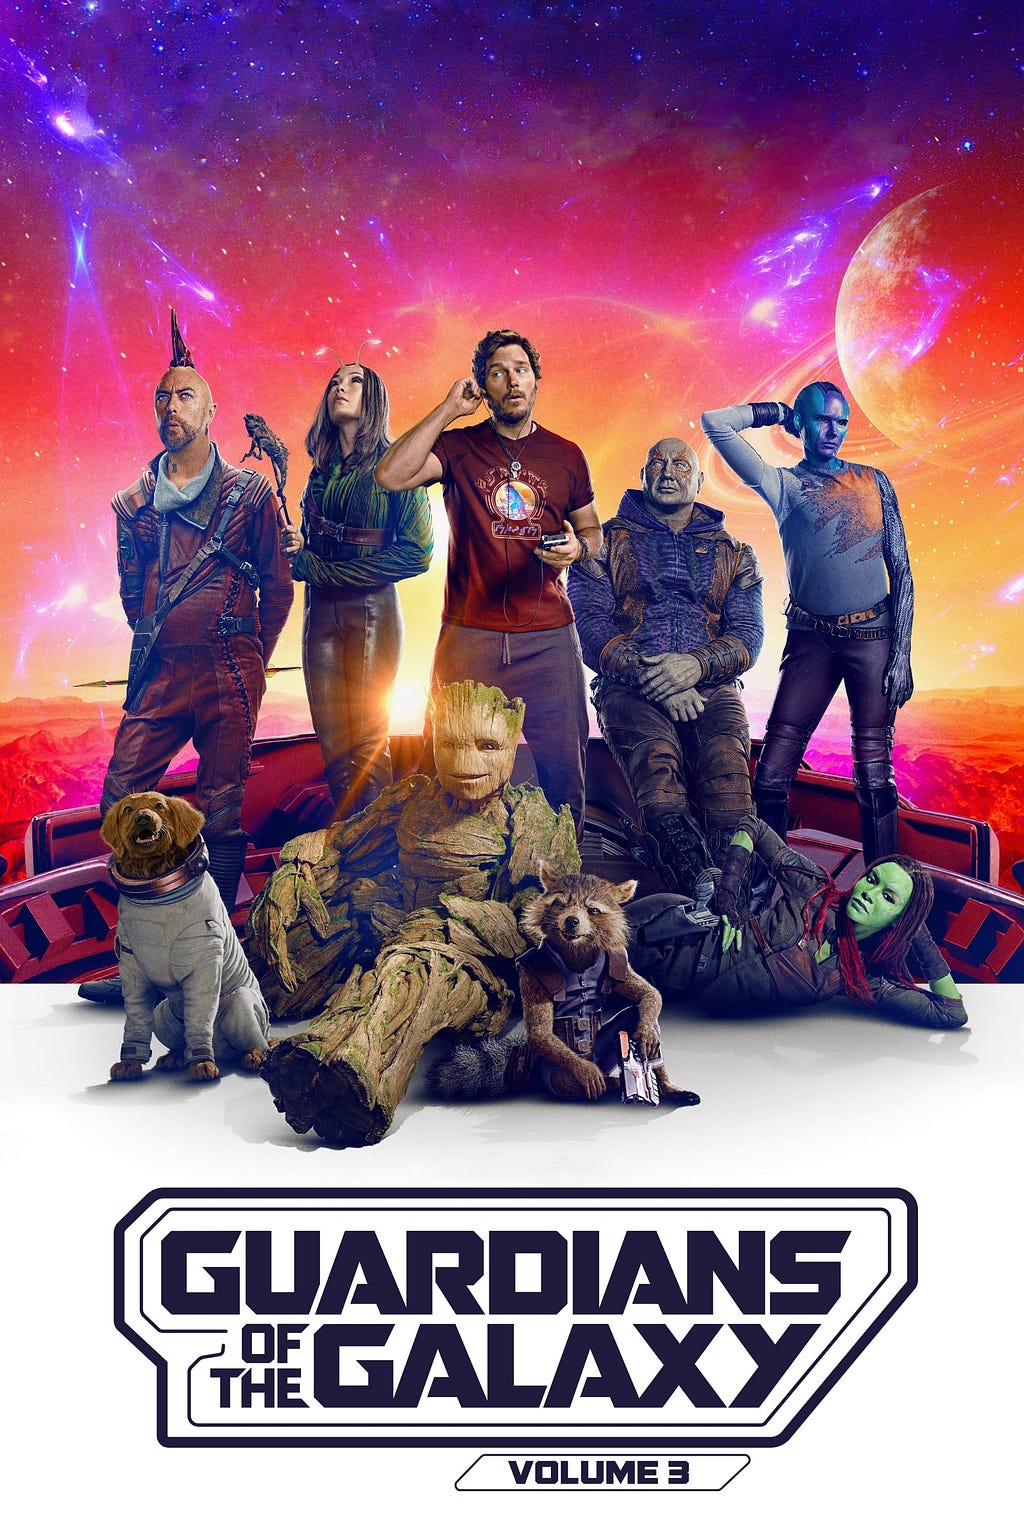 Guardians of the Galaxy Vol. 3 (2023) | Poster